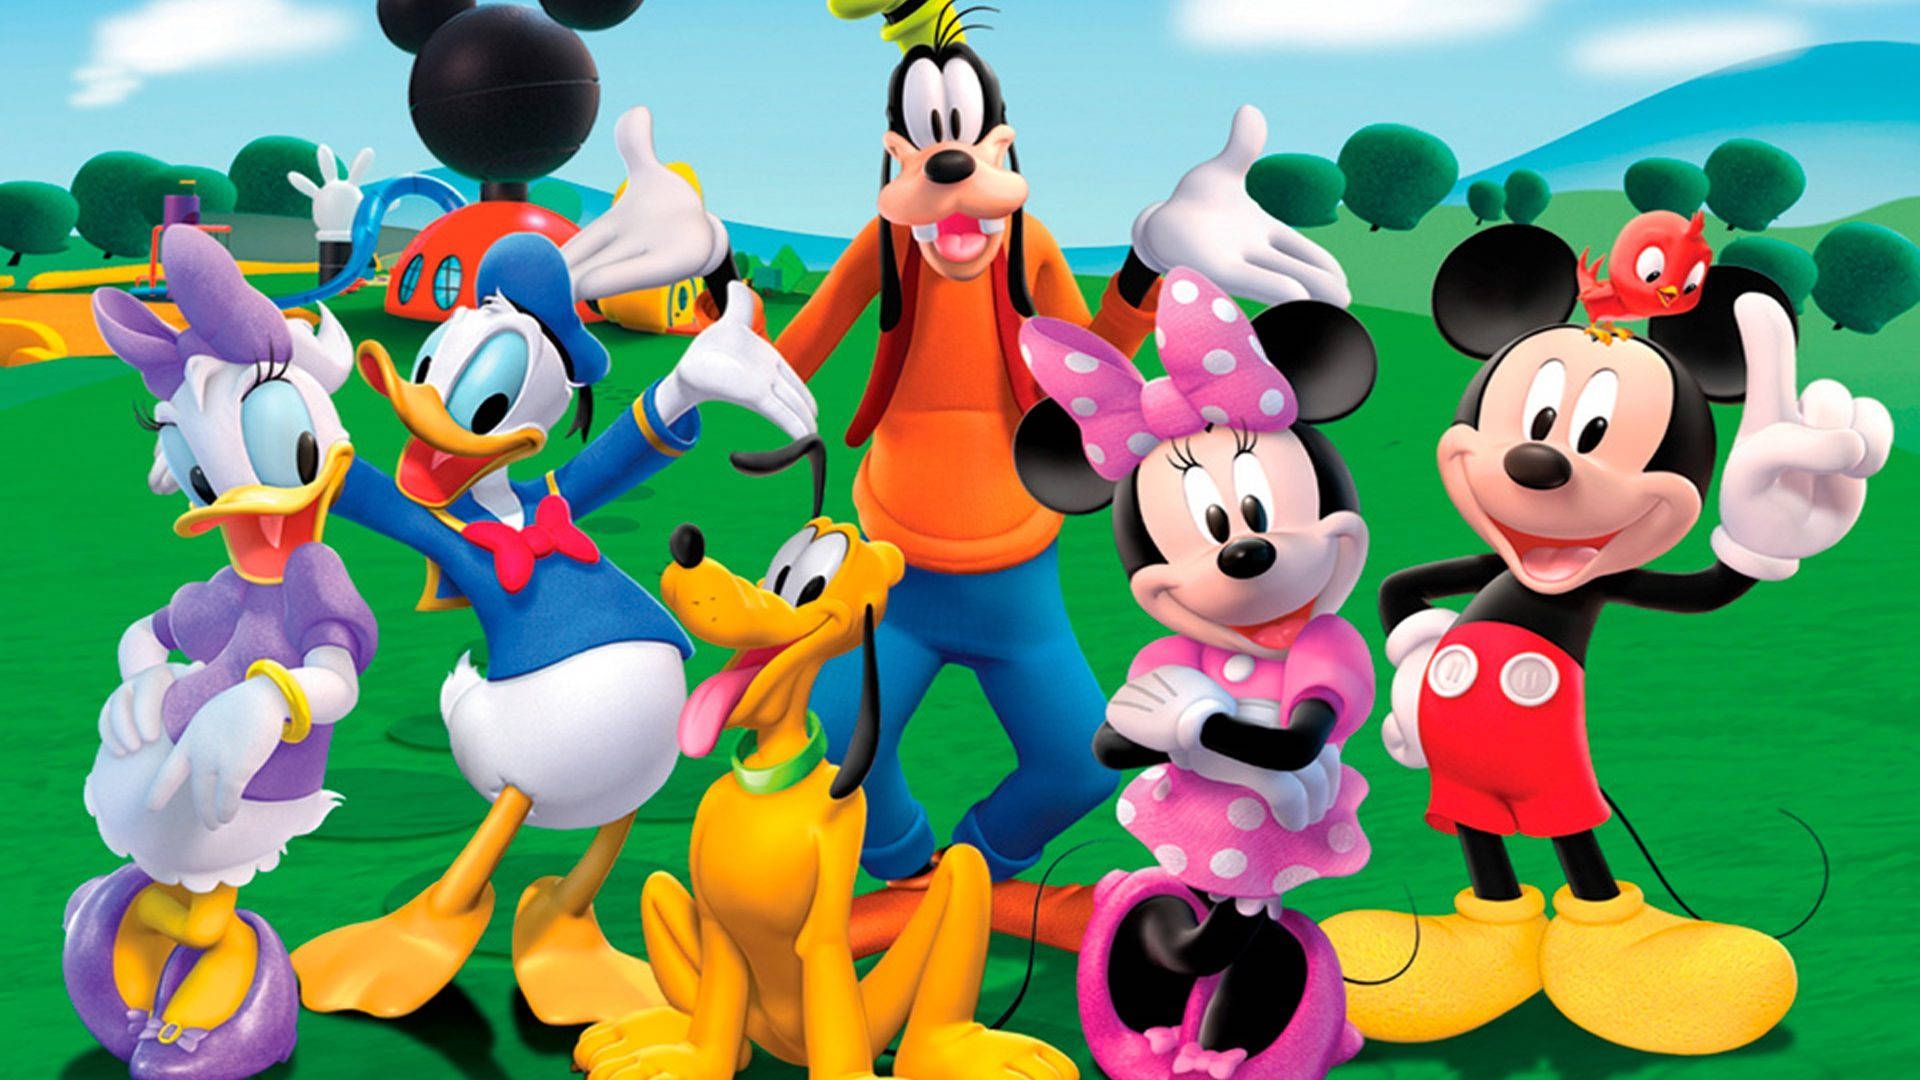 Pluto And Disney Characters Wallpaper